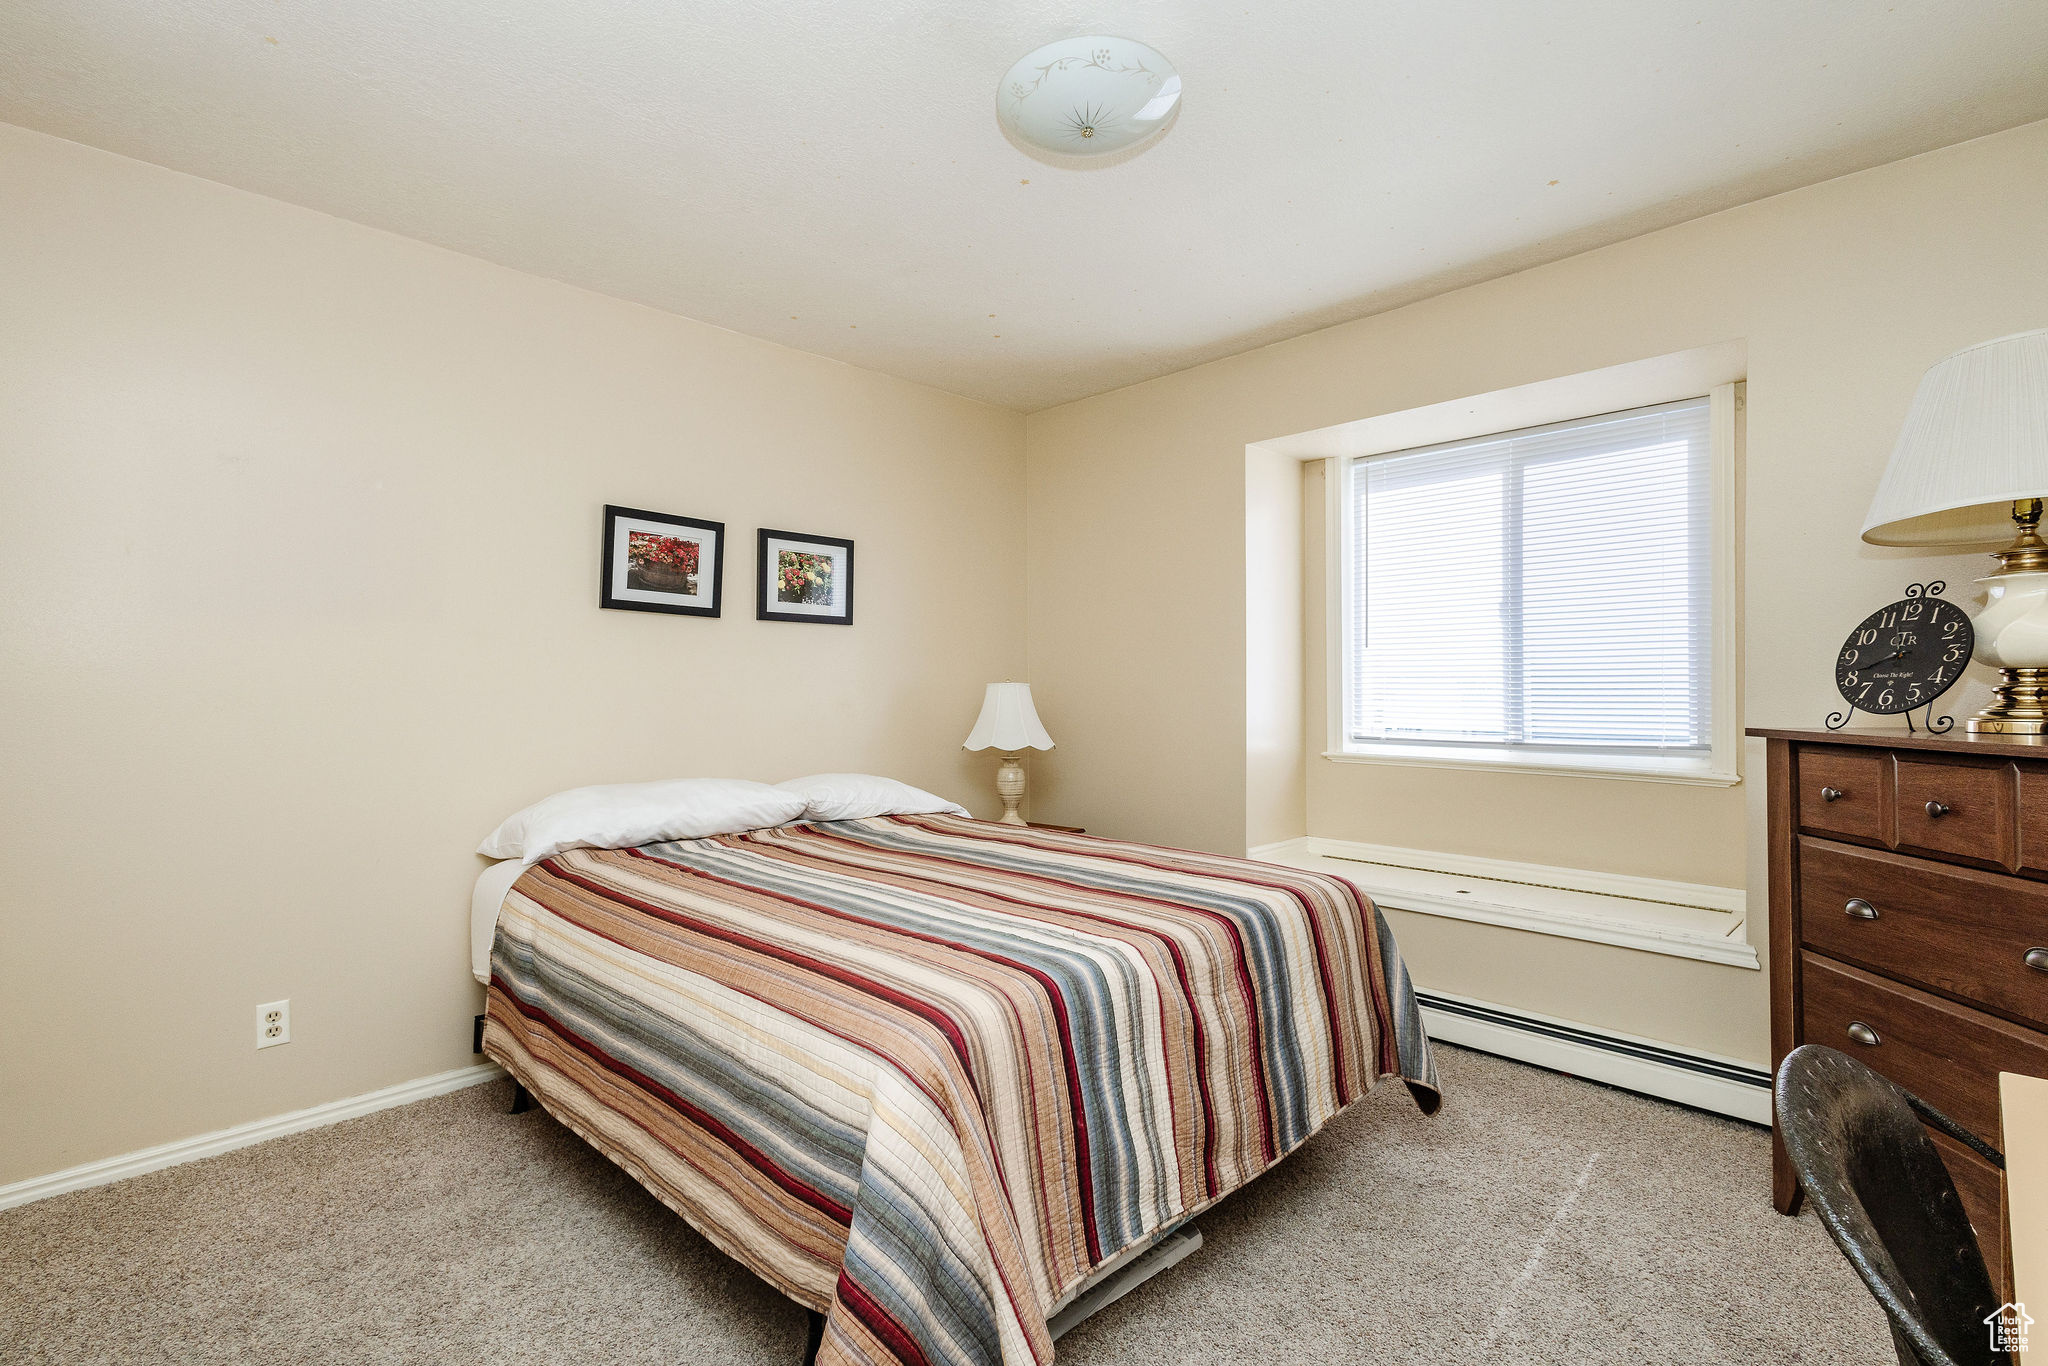 Carpeted bedroom with a baseboard heating unit